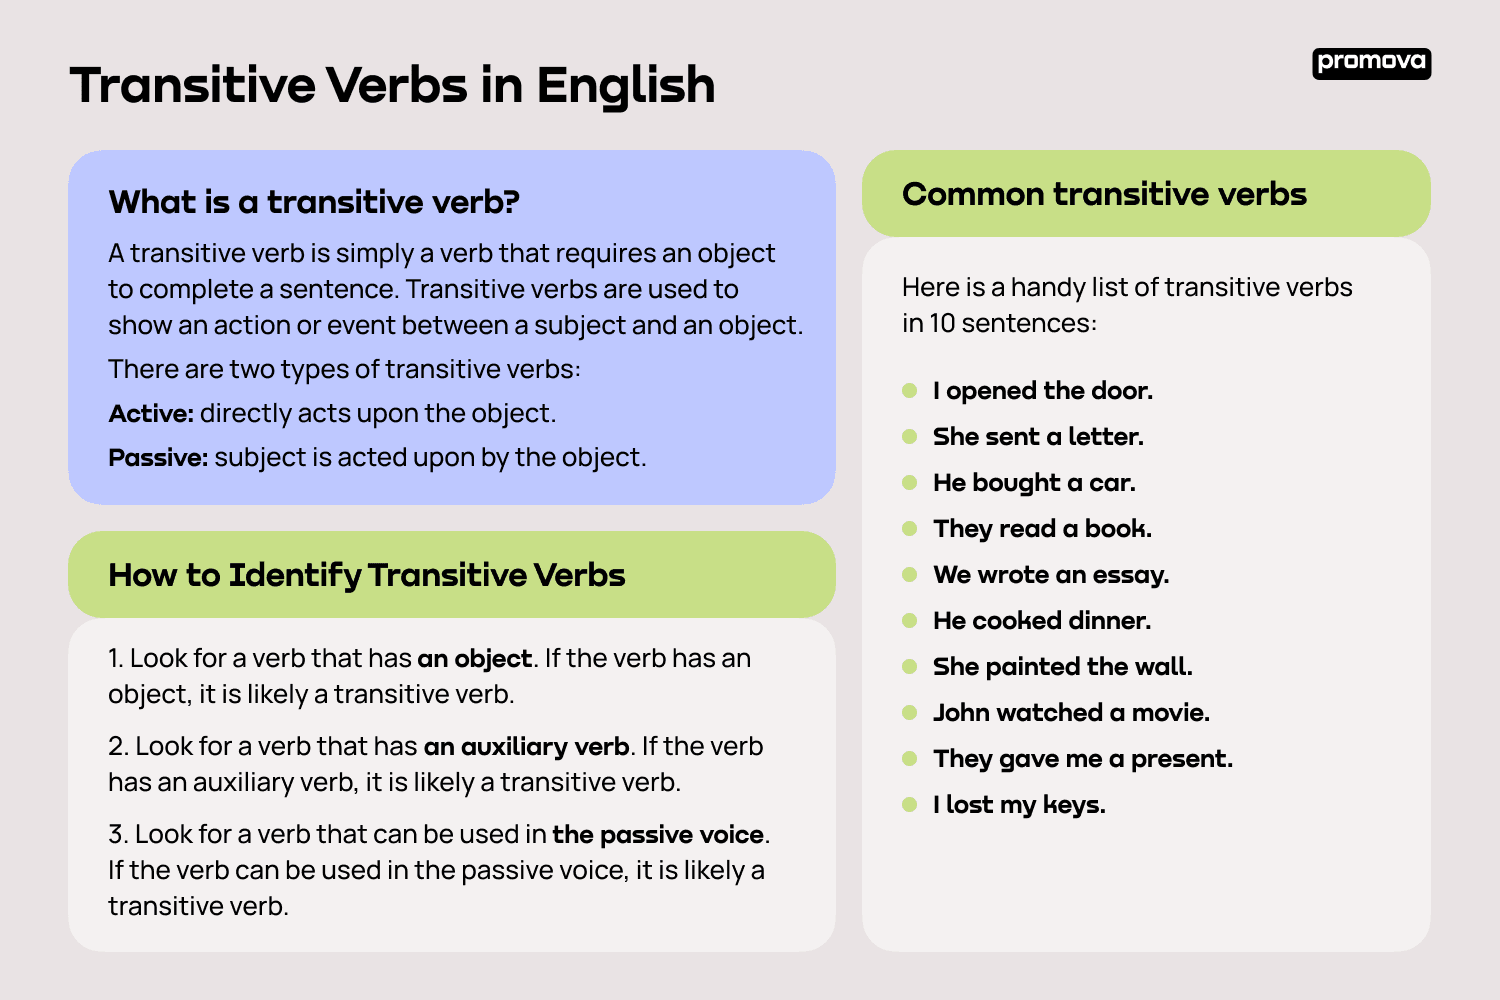 Transitive Verbs in English